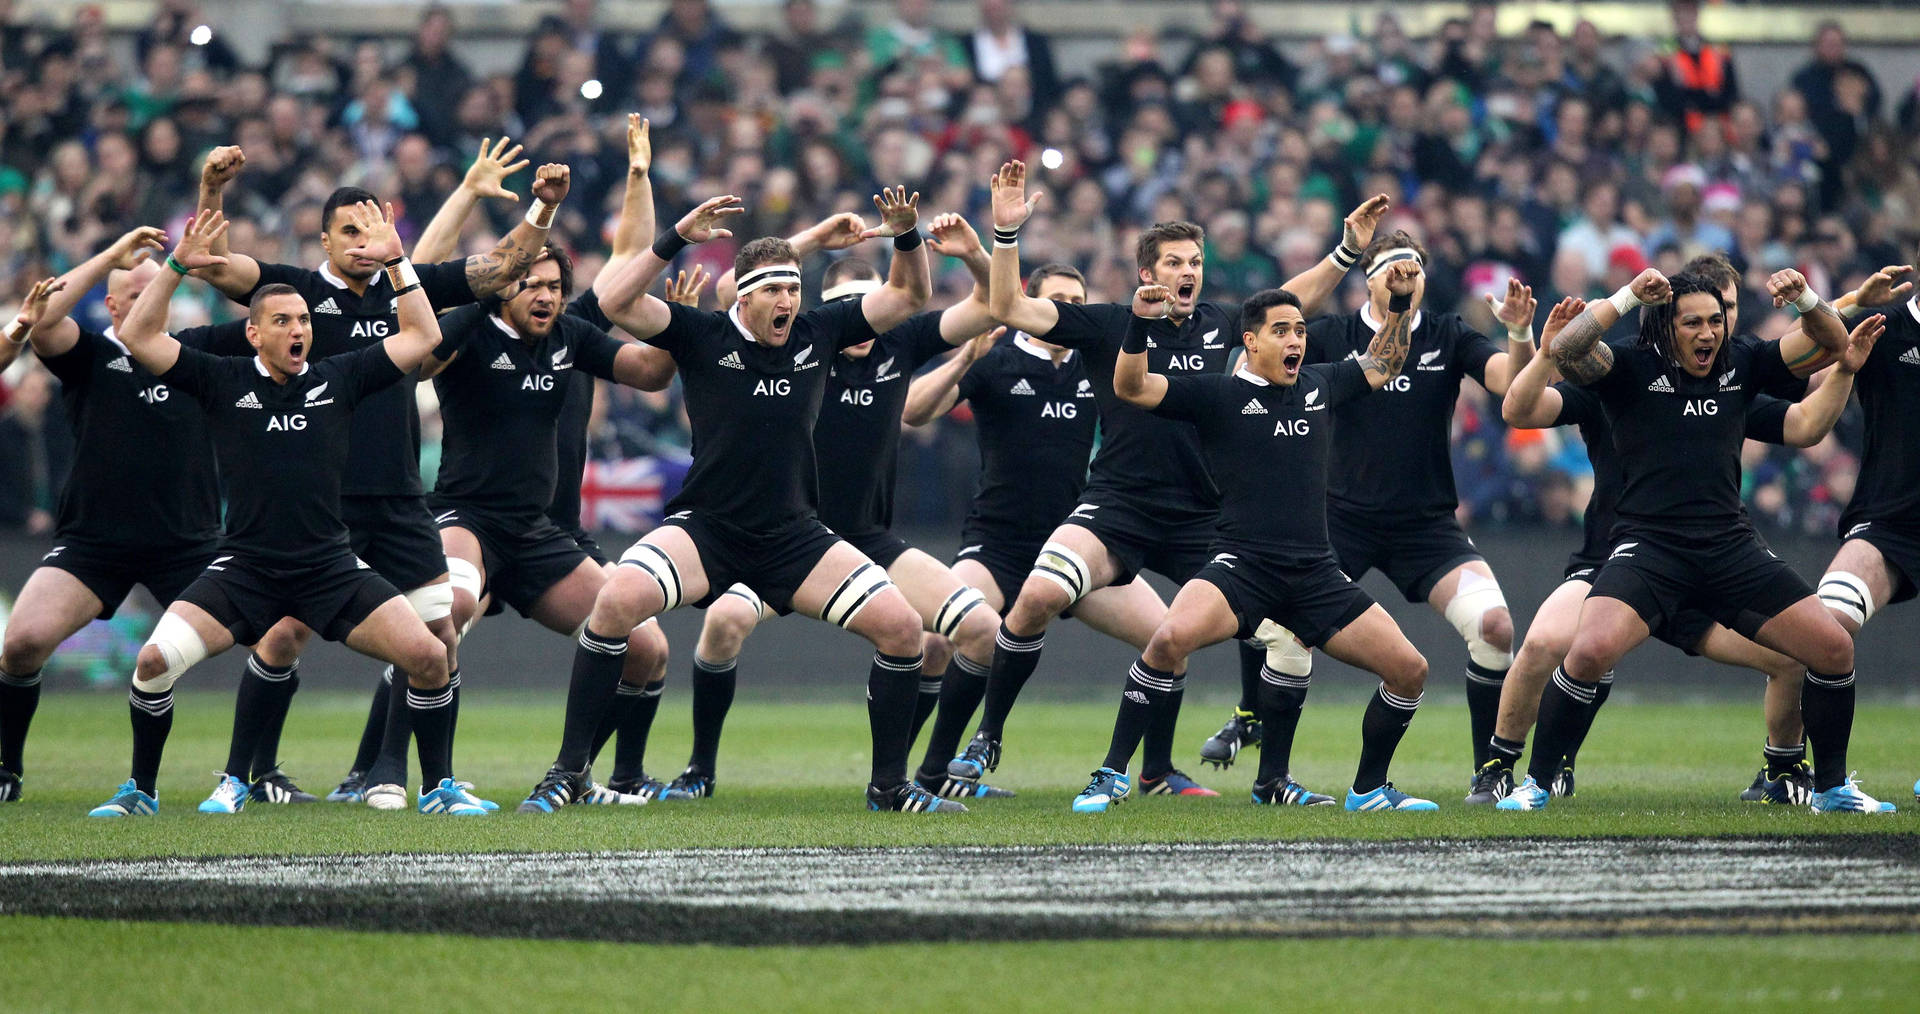 Caption: The All Blacks Rugby Team Performing The Haka Ritual